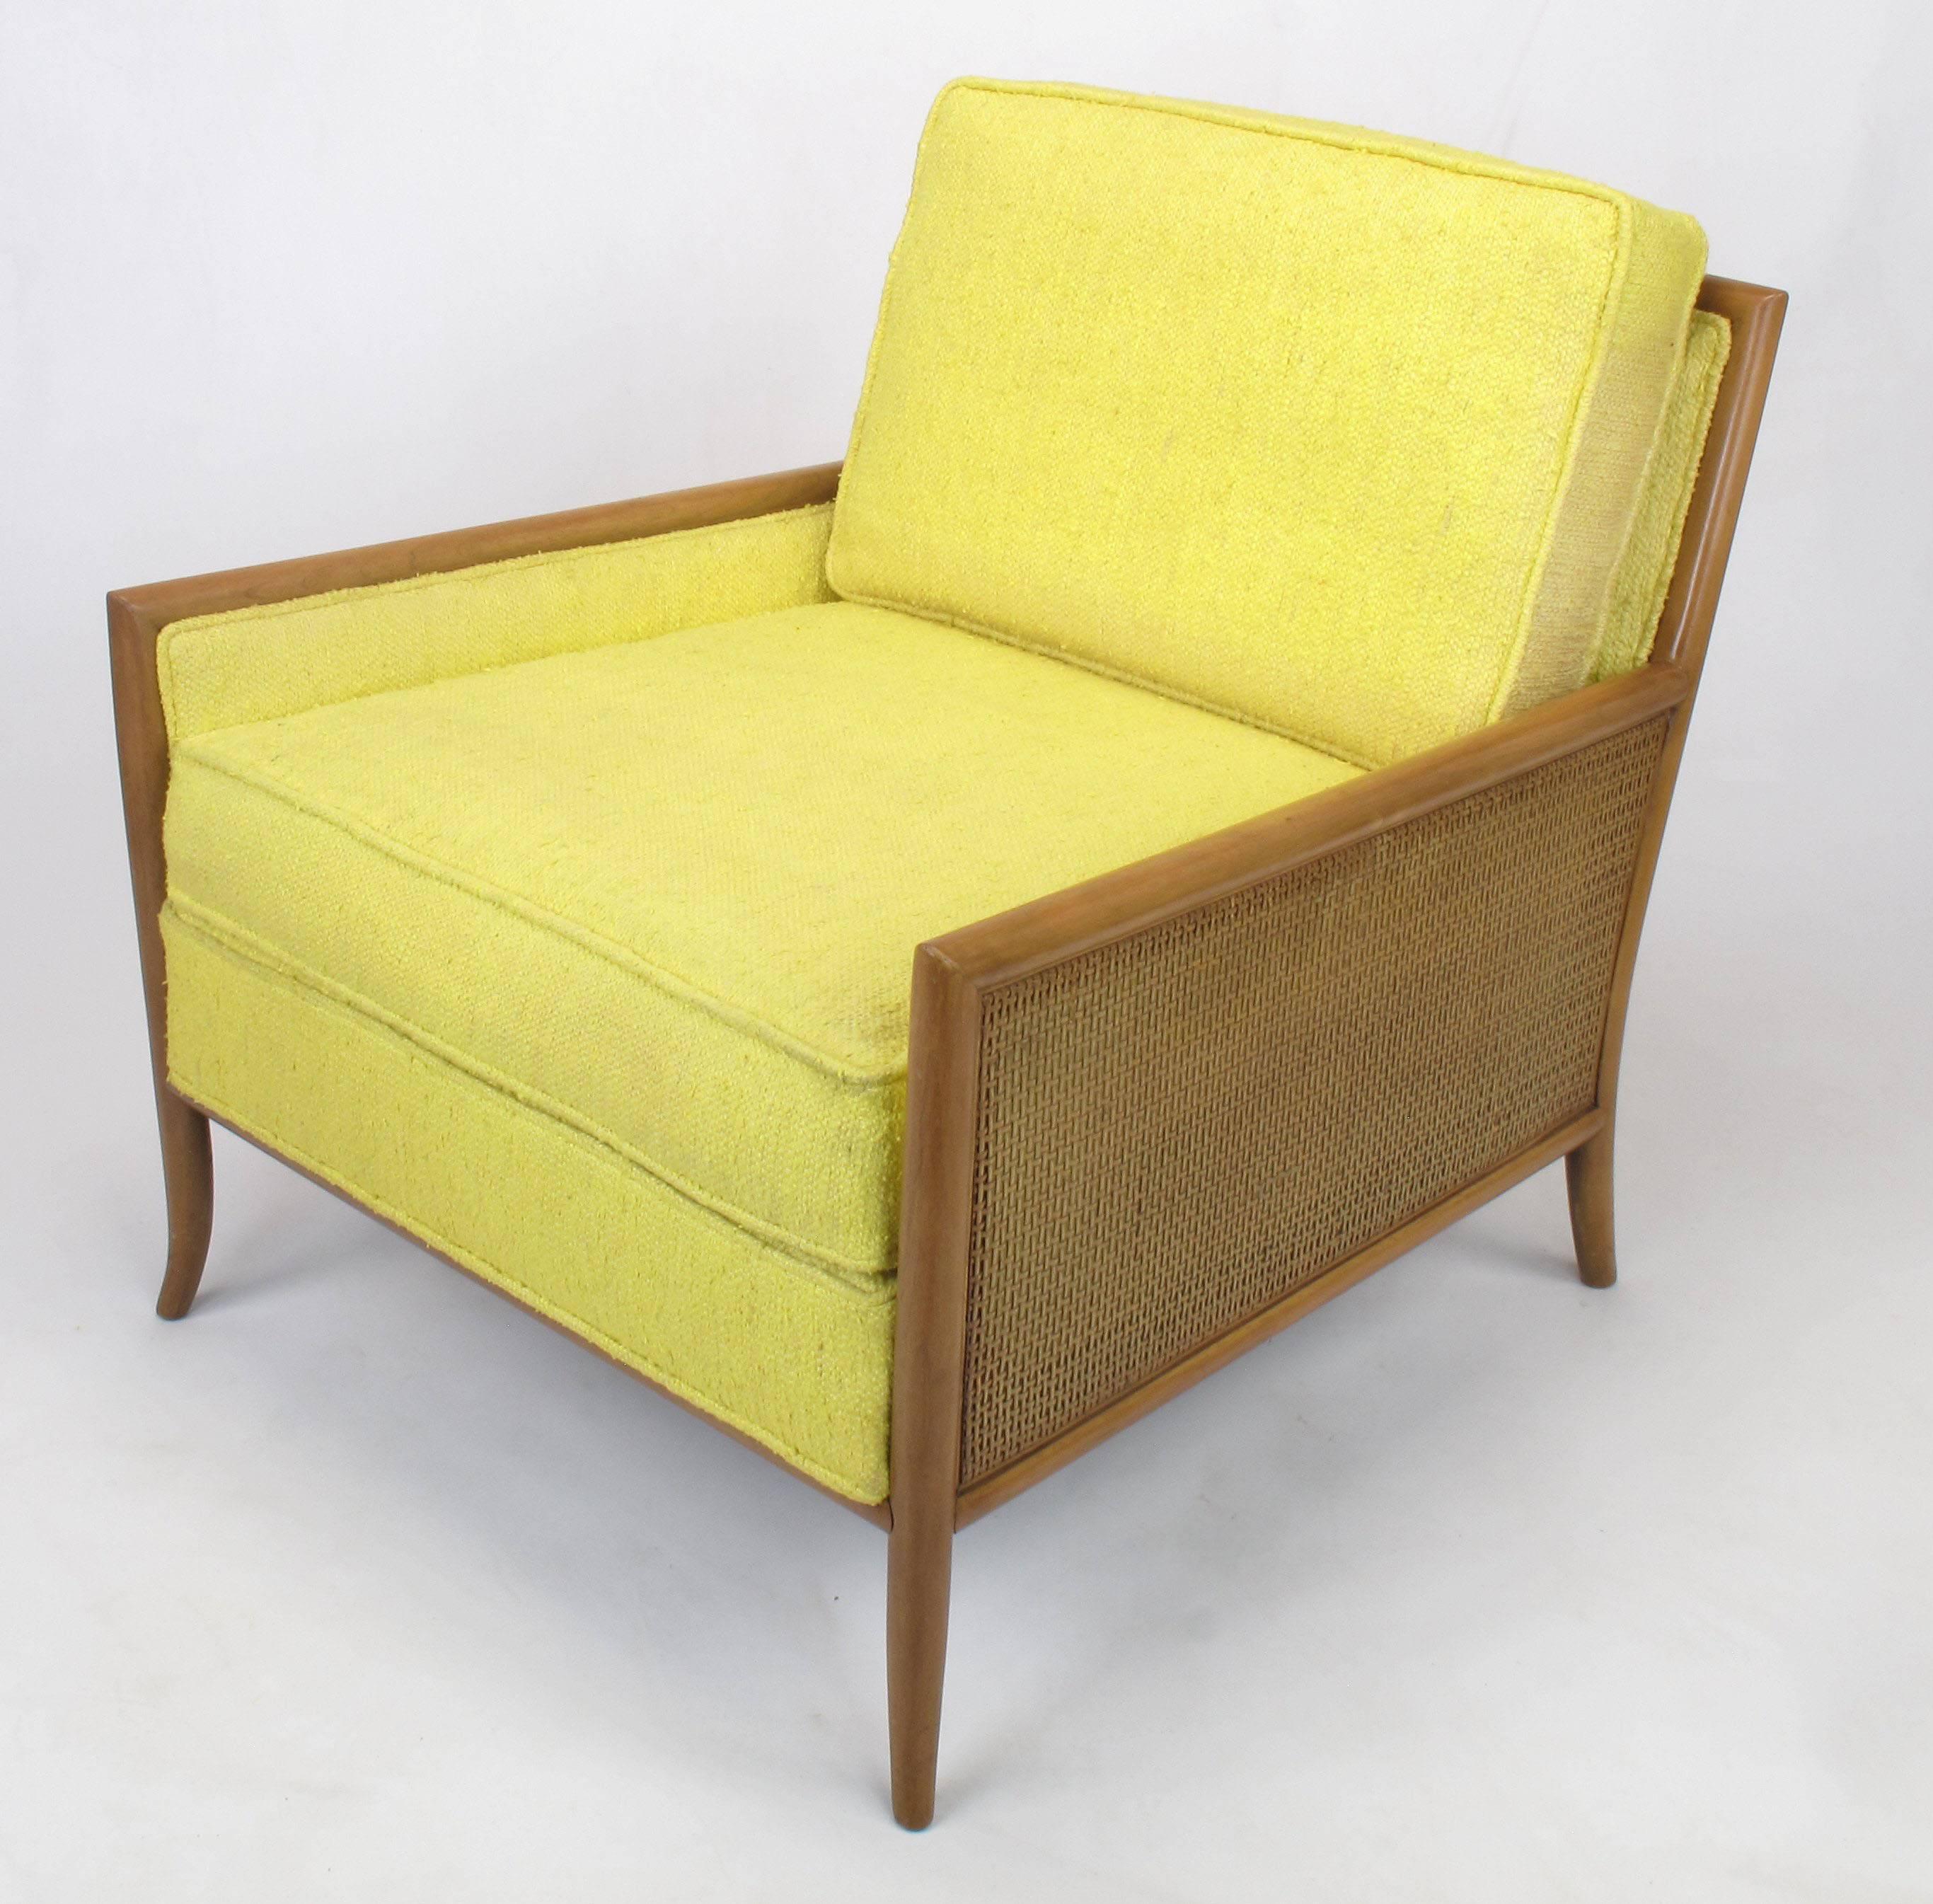 Mid-Century Modern Pair of Walnut & Yellow Haitian Cotton Lounge Chairs after TH. Robsjohn-Gibbings